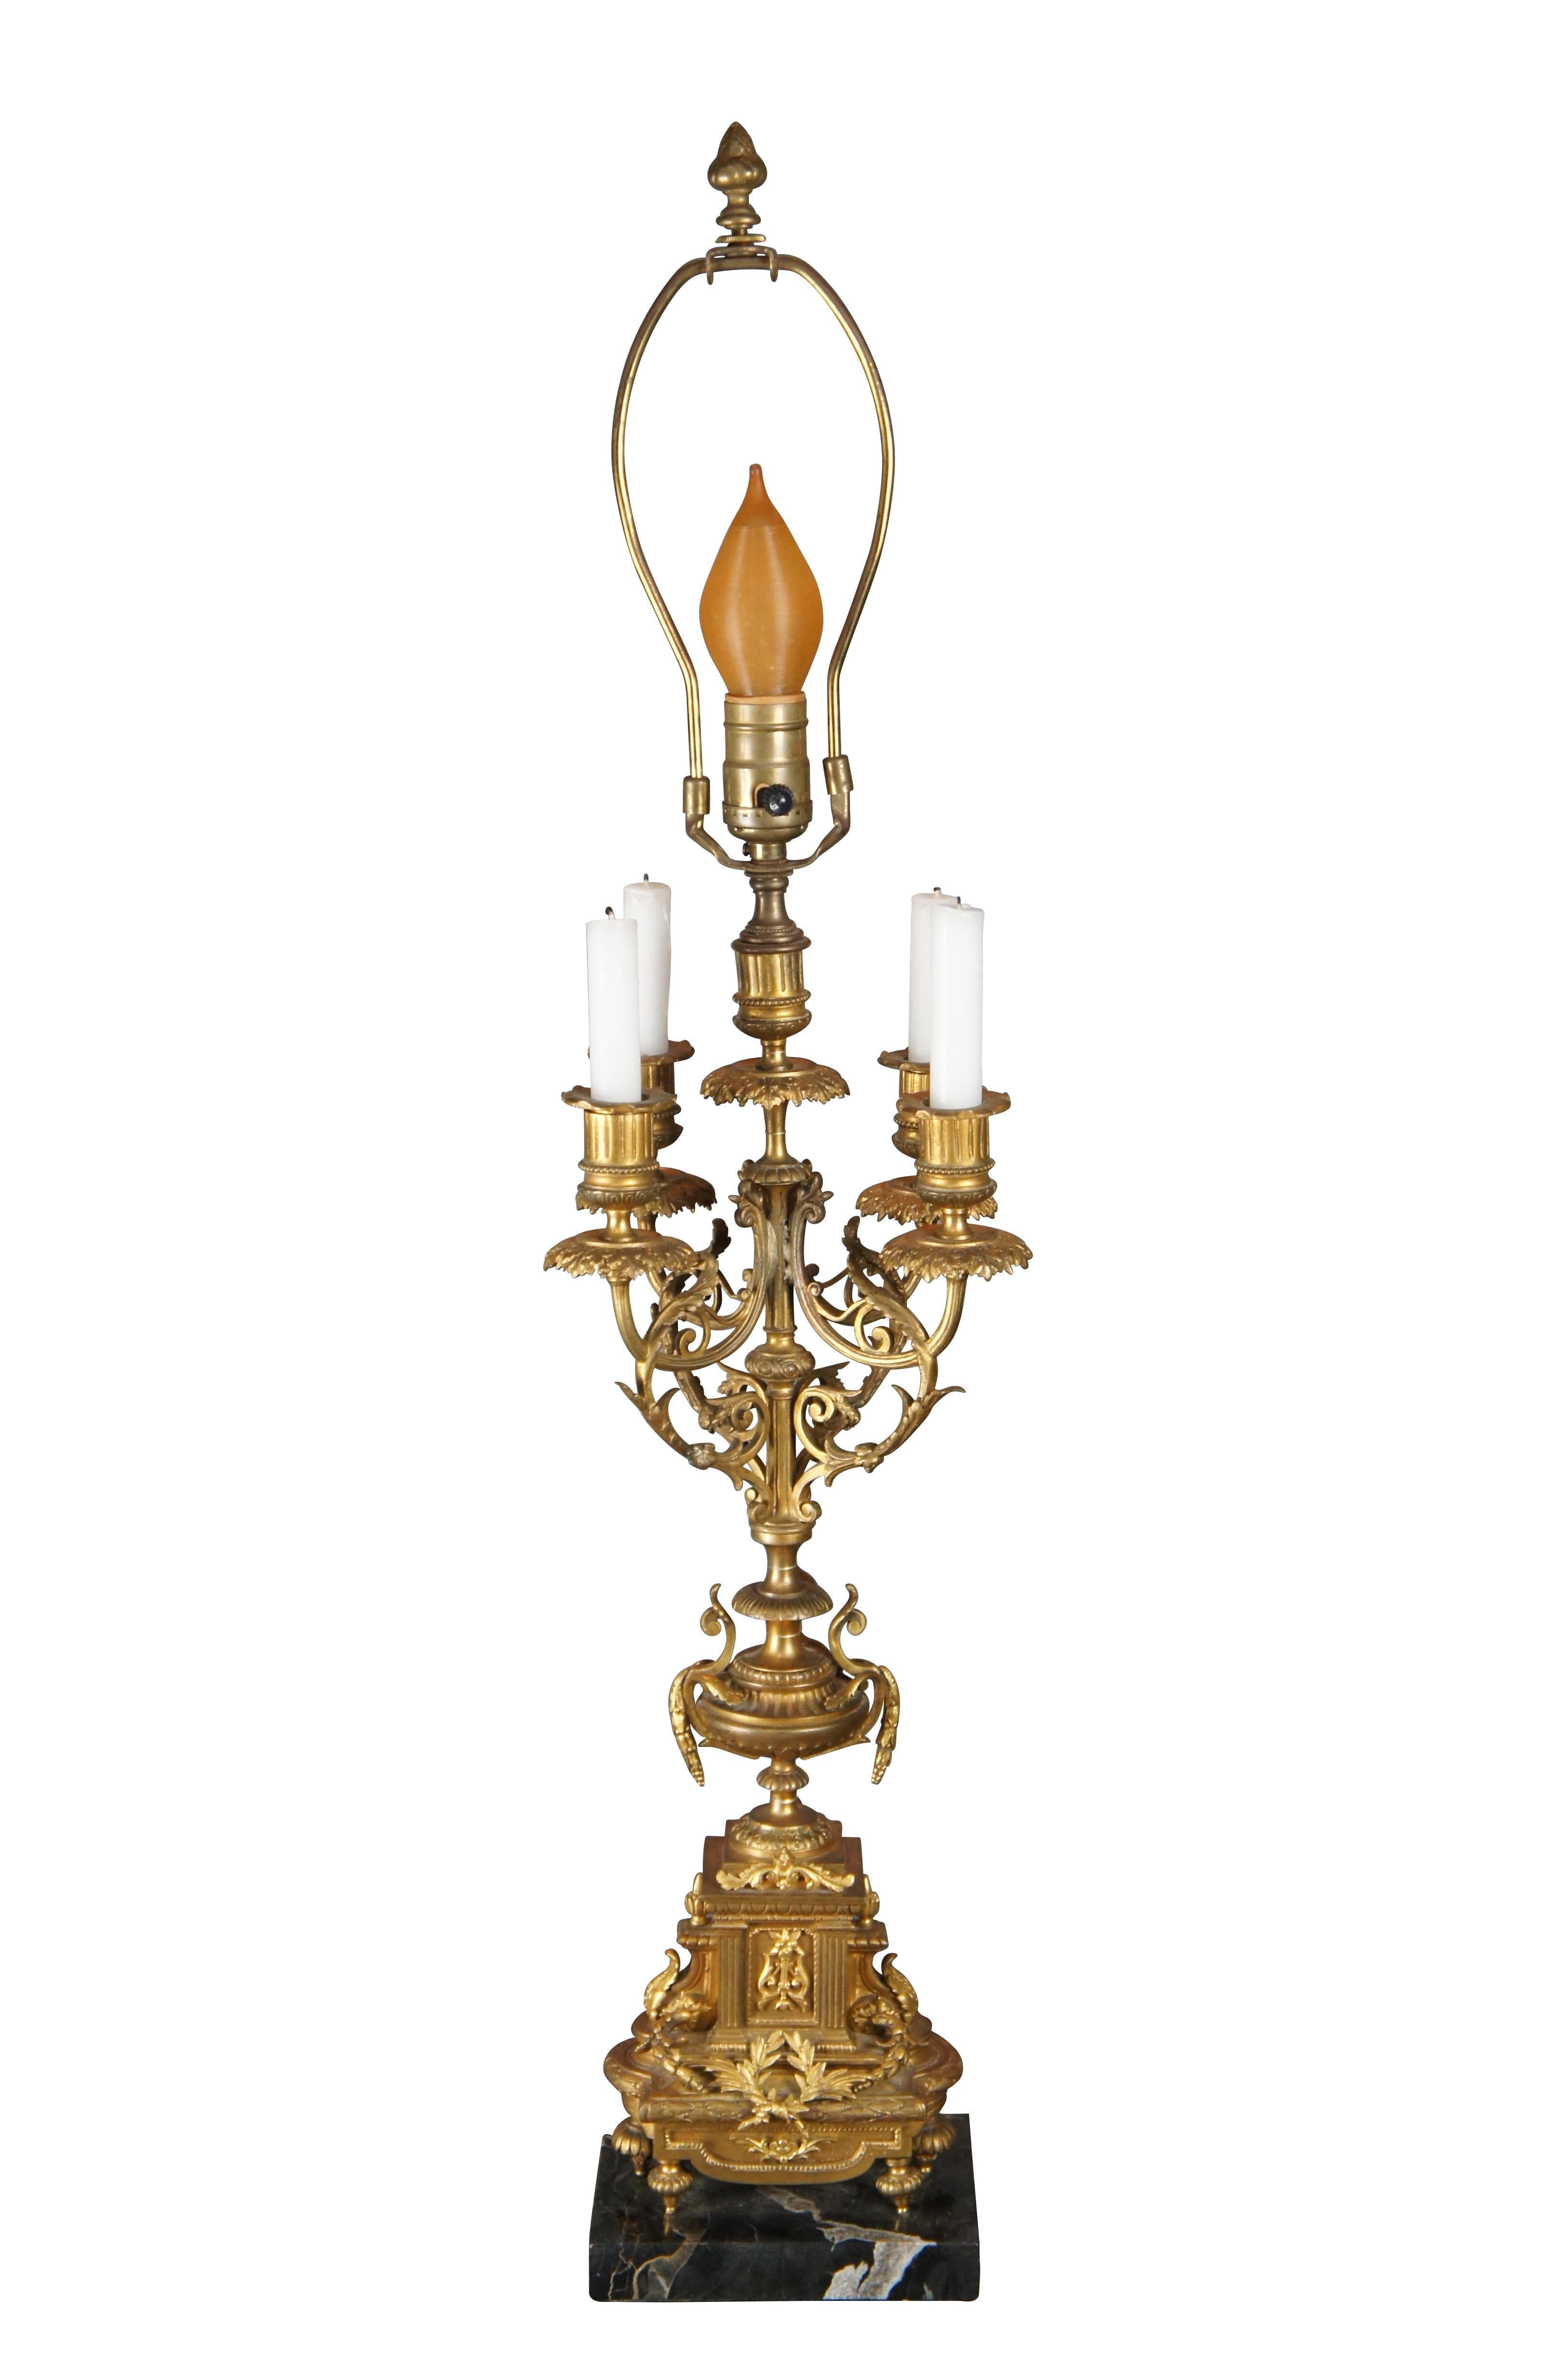 An elegant French Louis XVI Converted Candelabra Lamp. Features a gilt brass finish with classical motifs over a footed base on a black marble plinth. Arms are scrolled with acanthus accents and ornate drip pans. Lamp was added at the center where